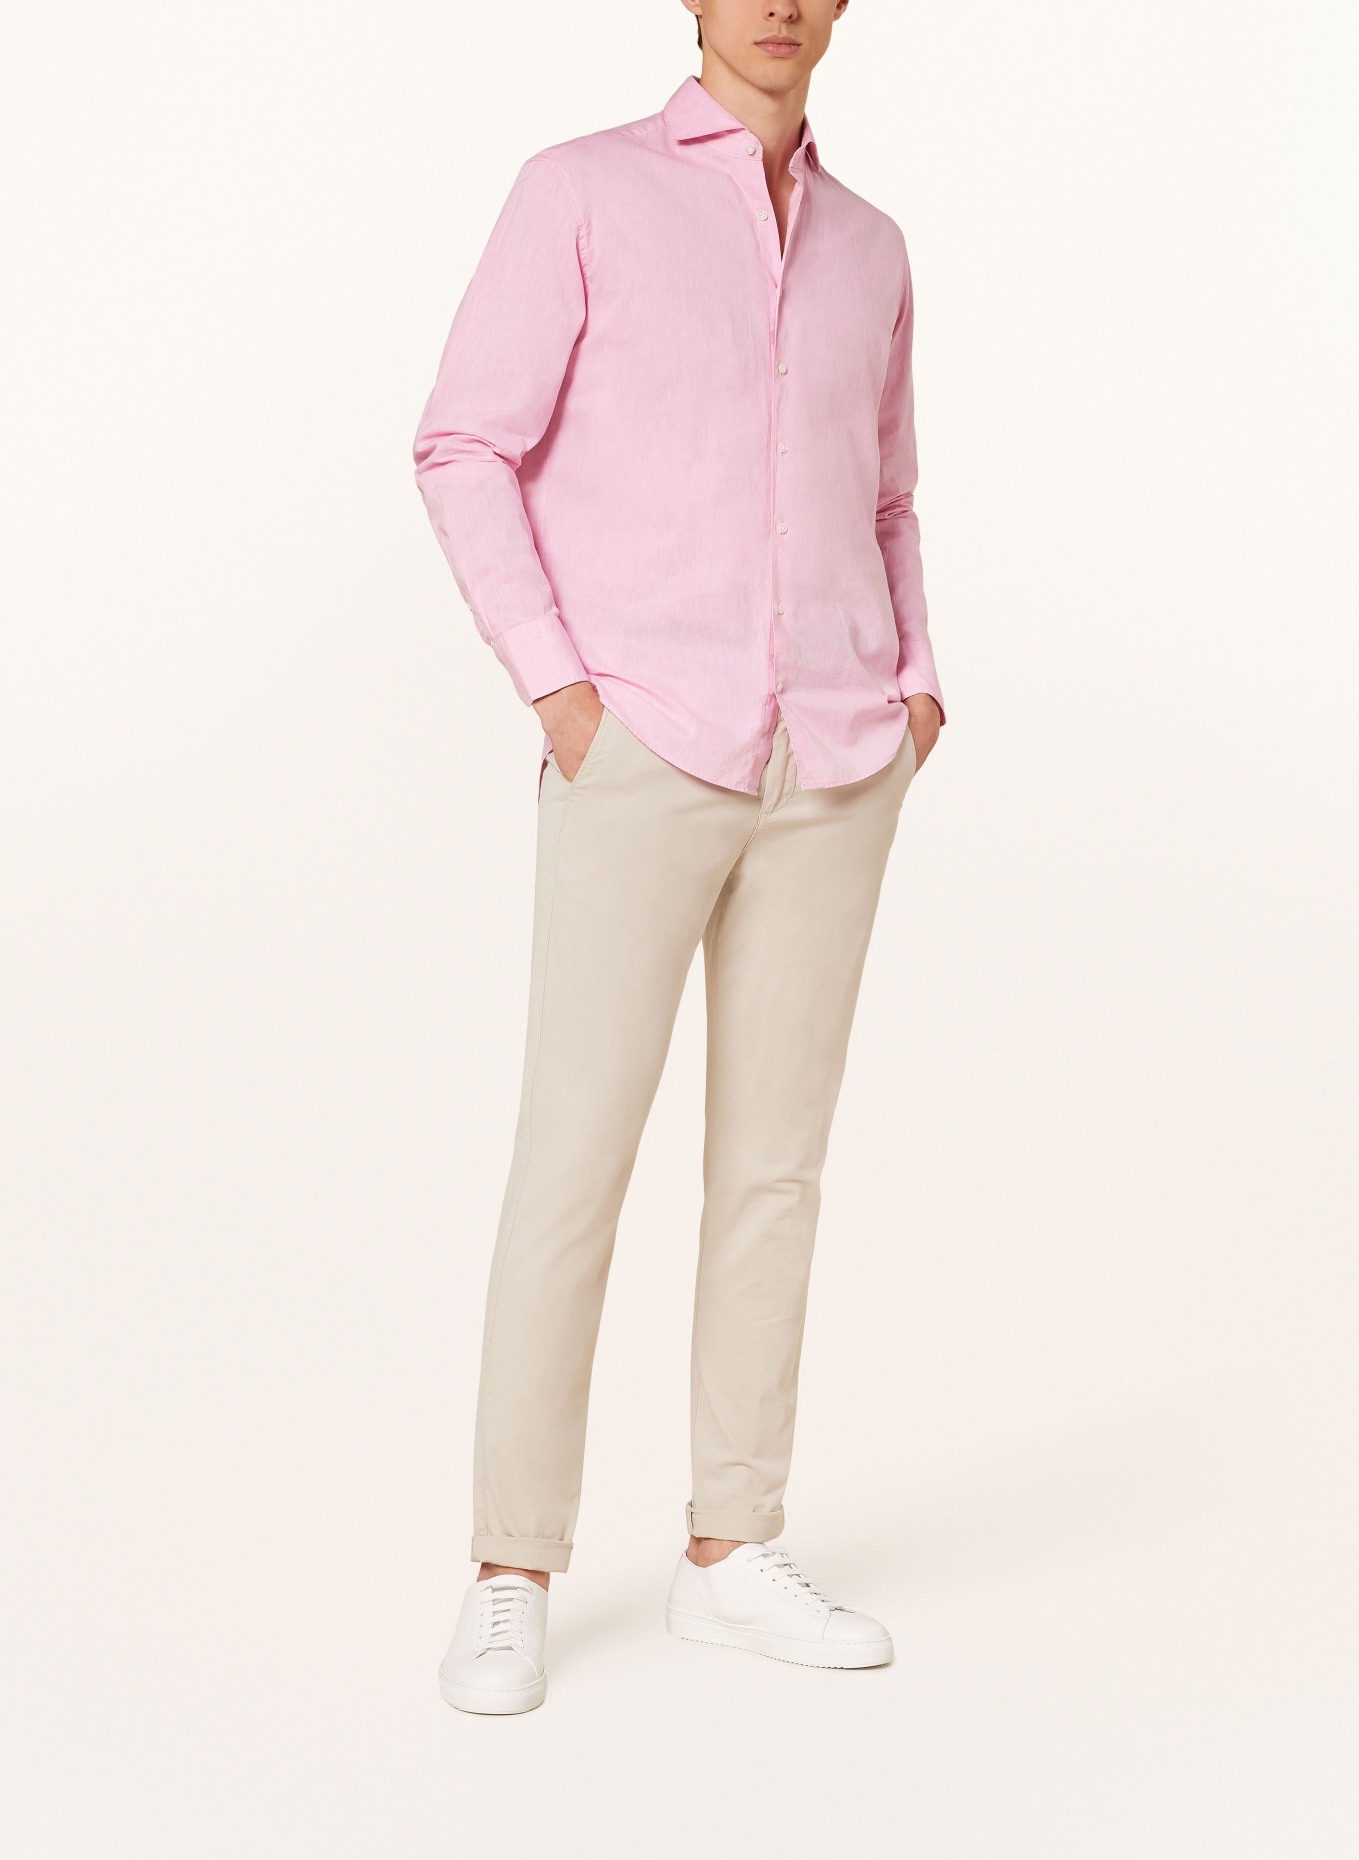 STROKESMAN'S Shirt regular fit with linen, Color: PINK (Image 2)